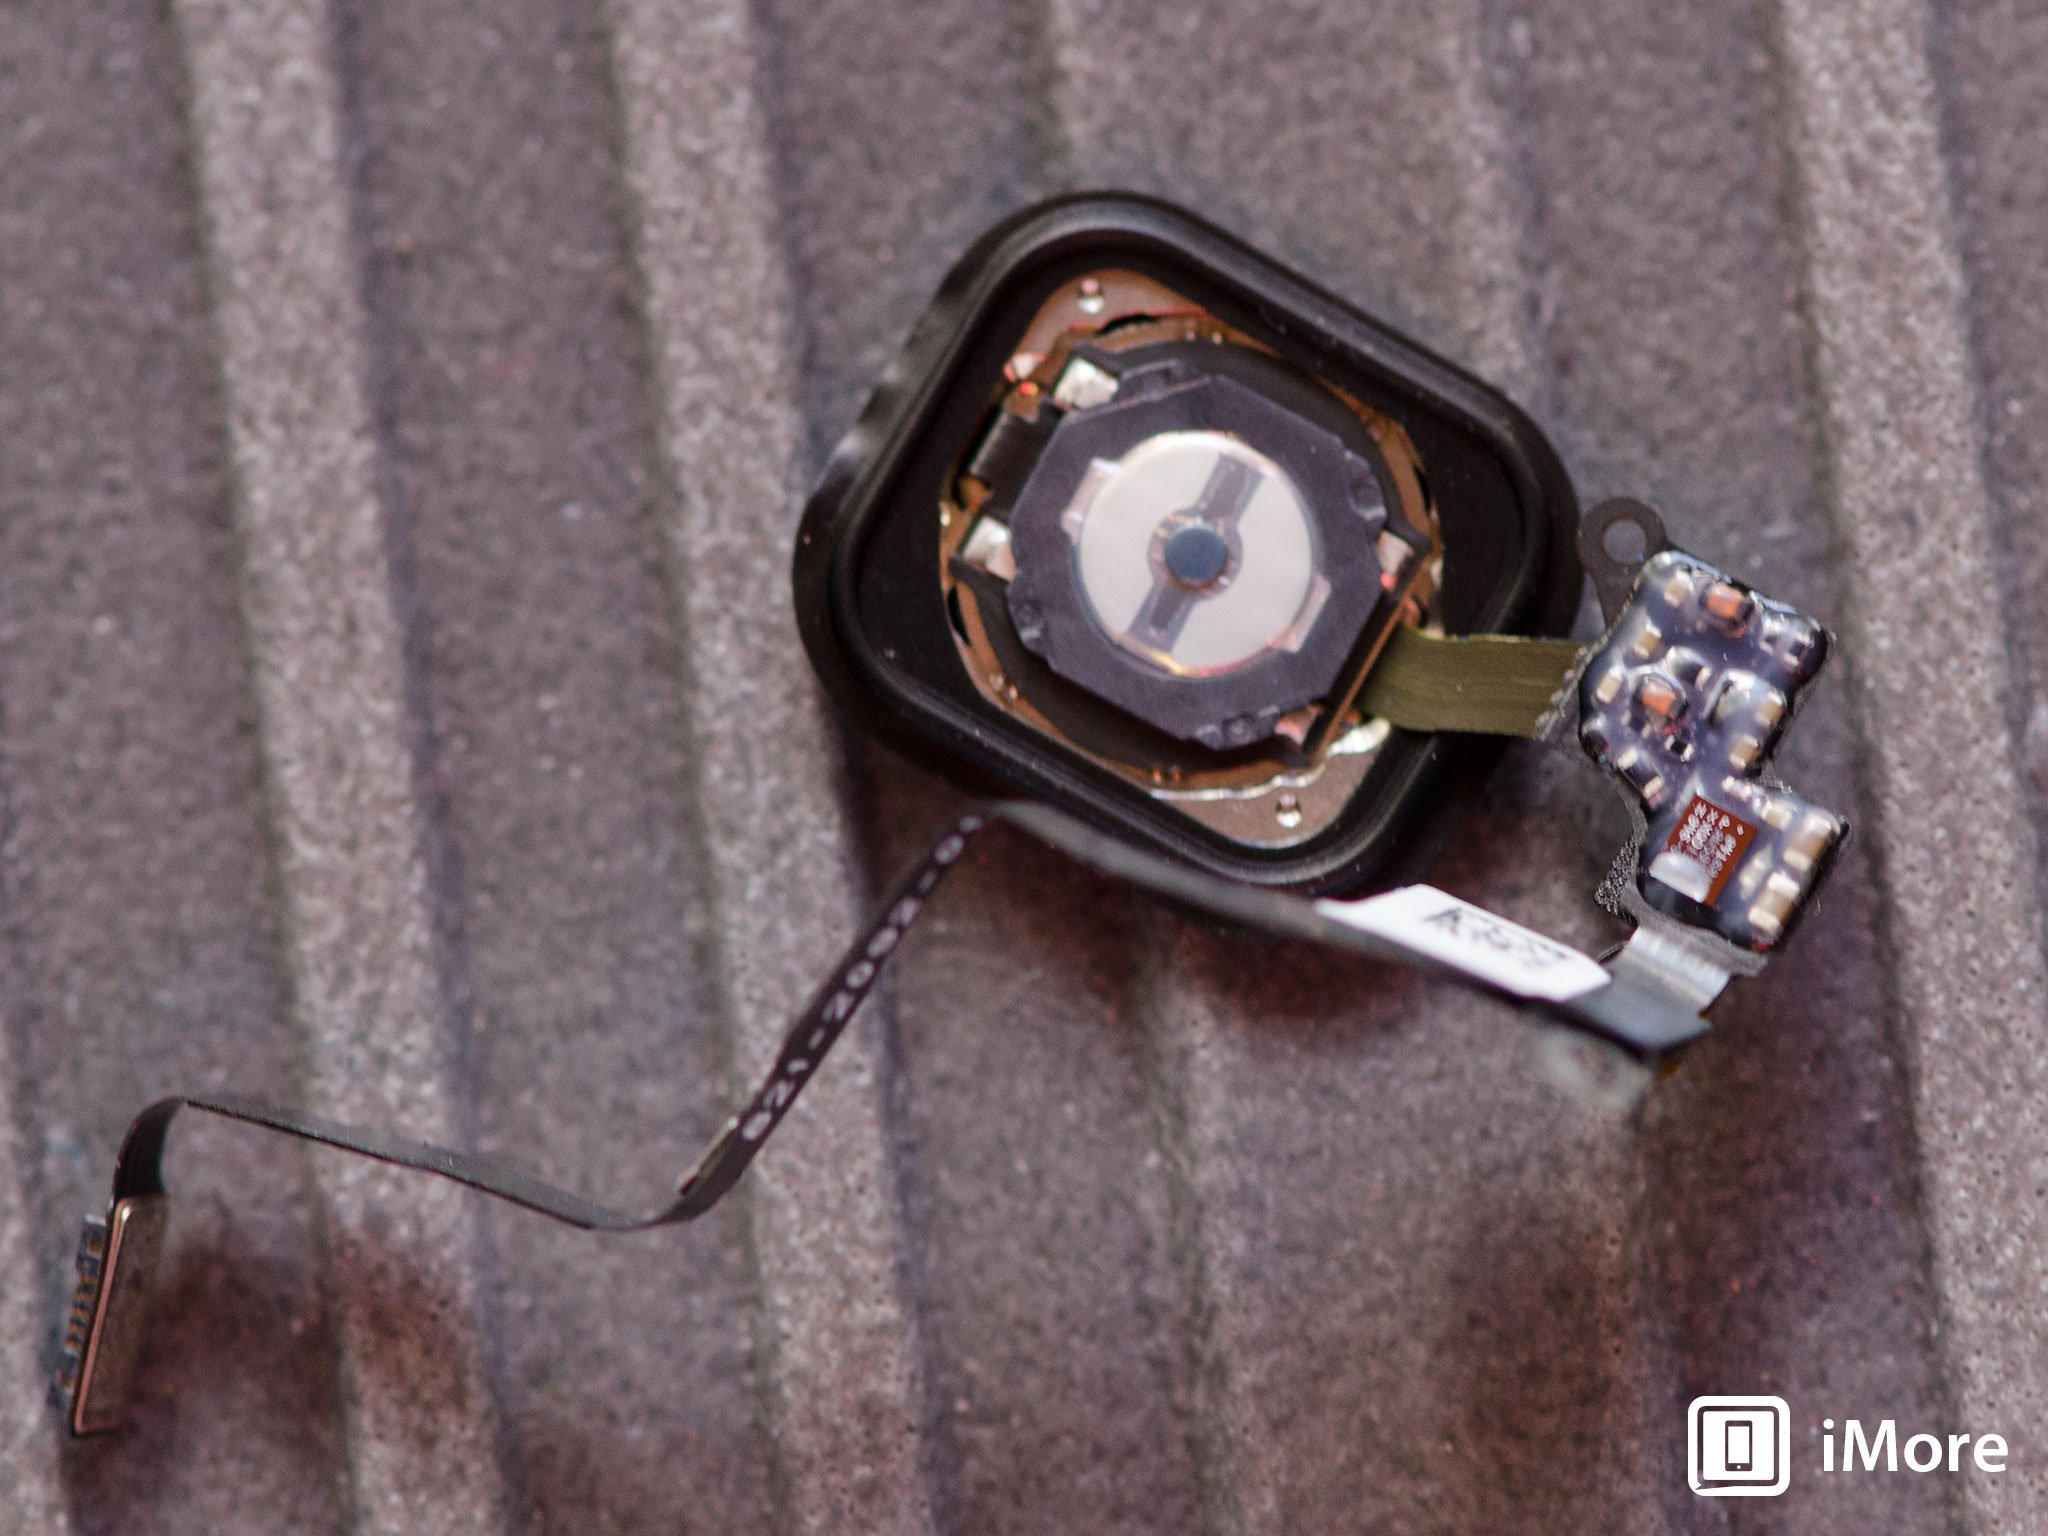 A closeup of the Touch ID sensor cable itself and Home button assembly